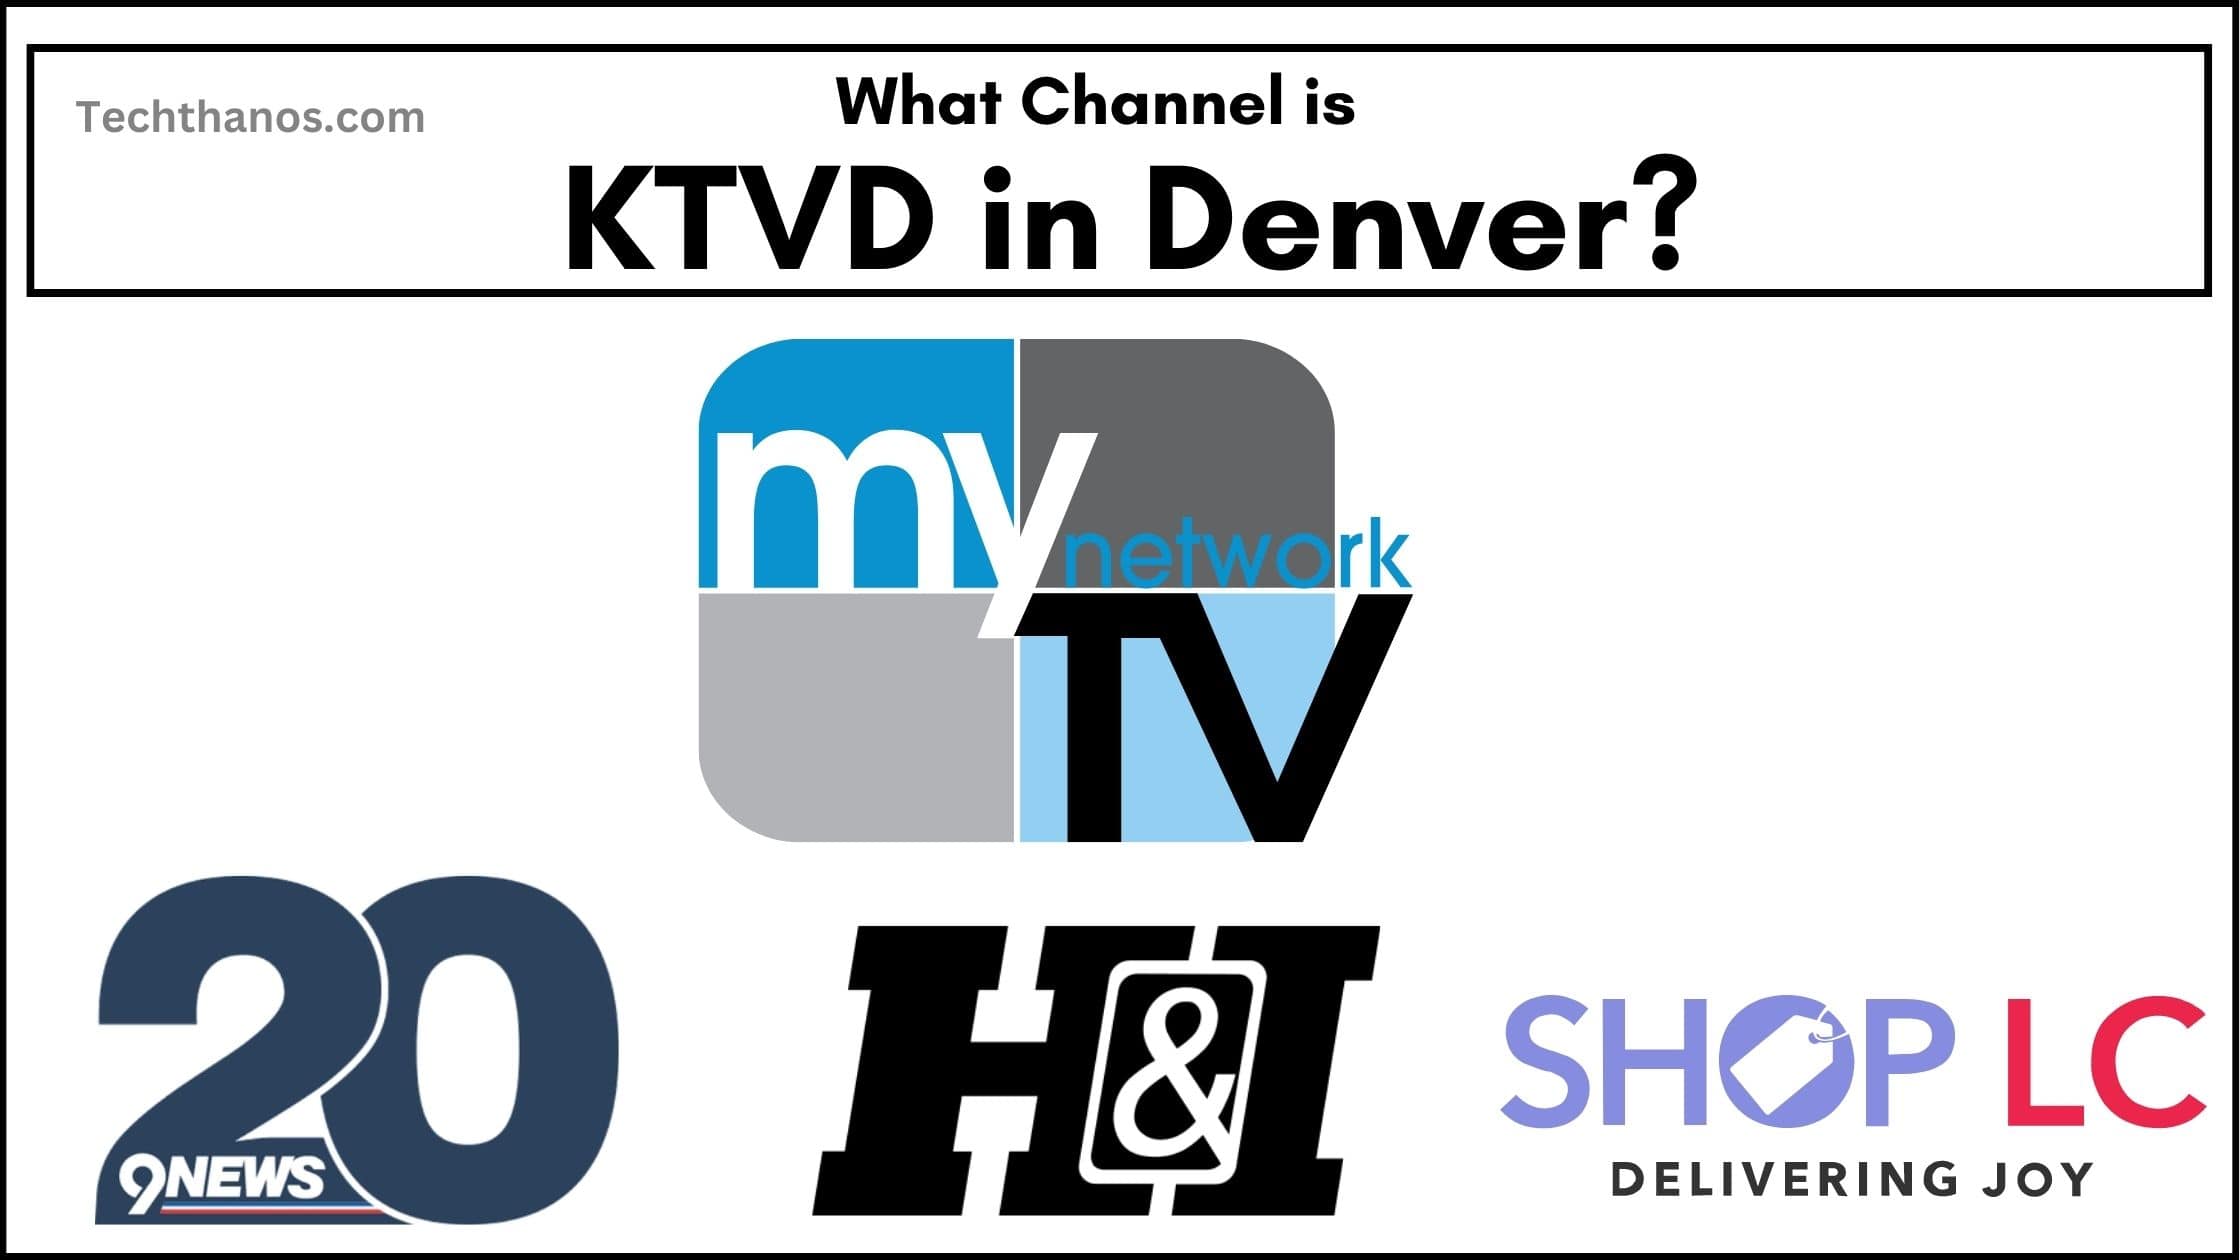 What Channel is KTVD in Denver?